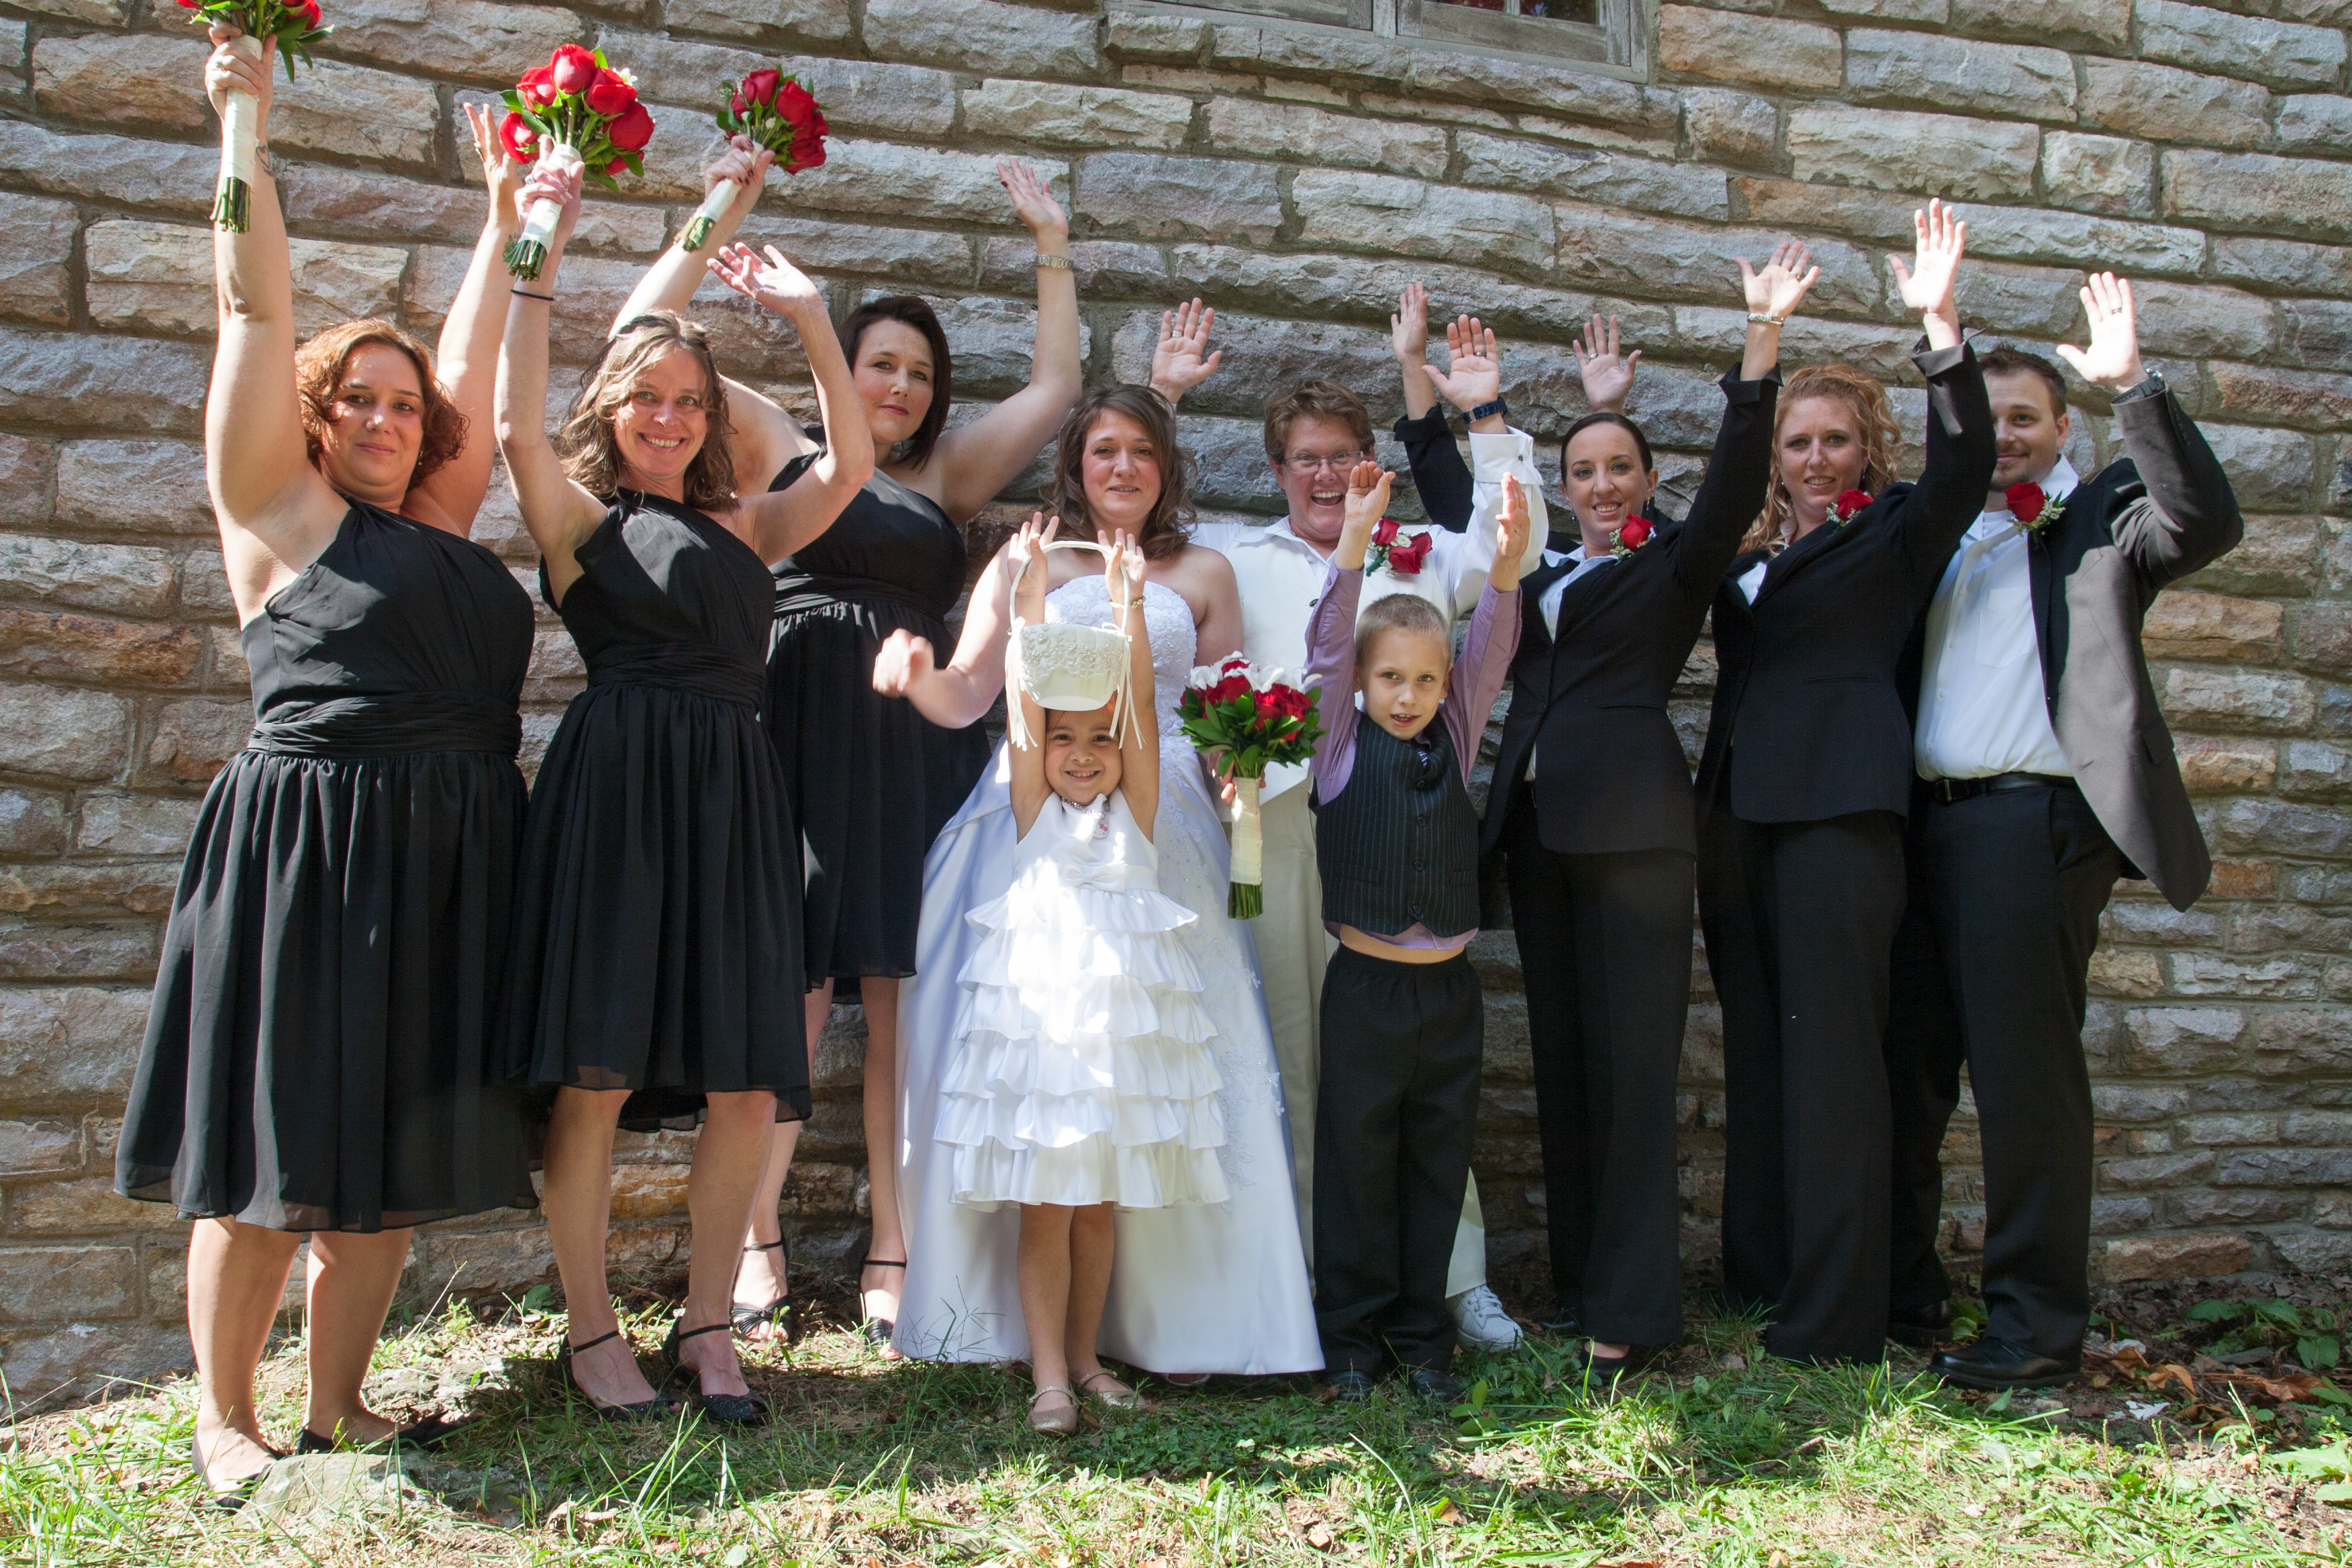 Wedding Party with Raised Hands